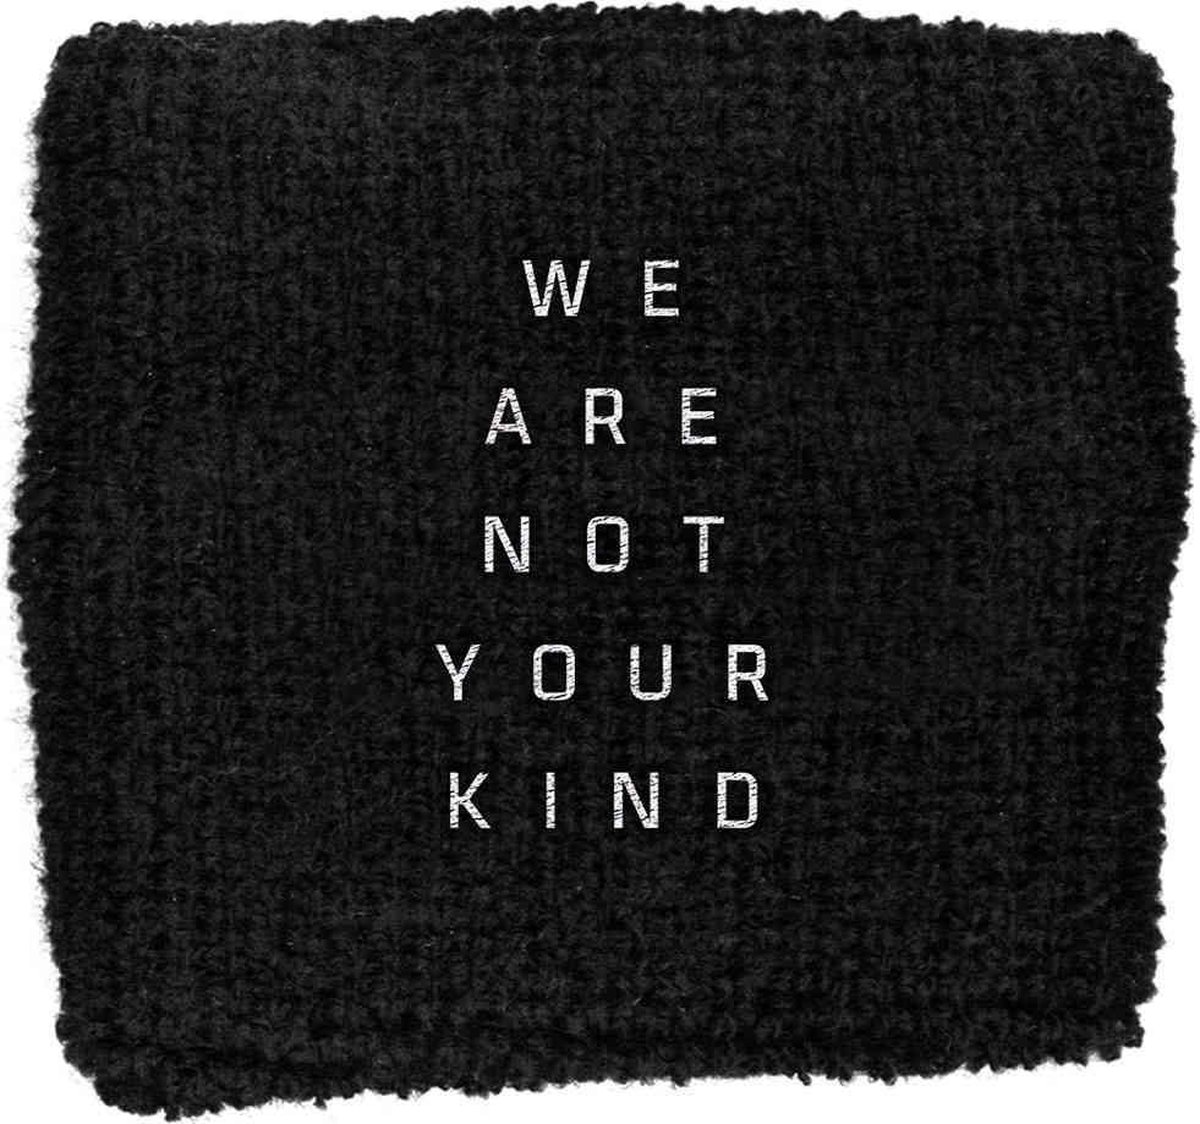 Slipknot Zweetband We Are Not Your Kind Zwart